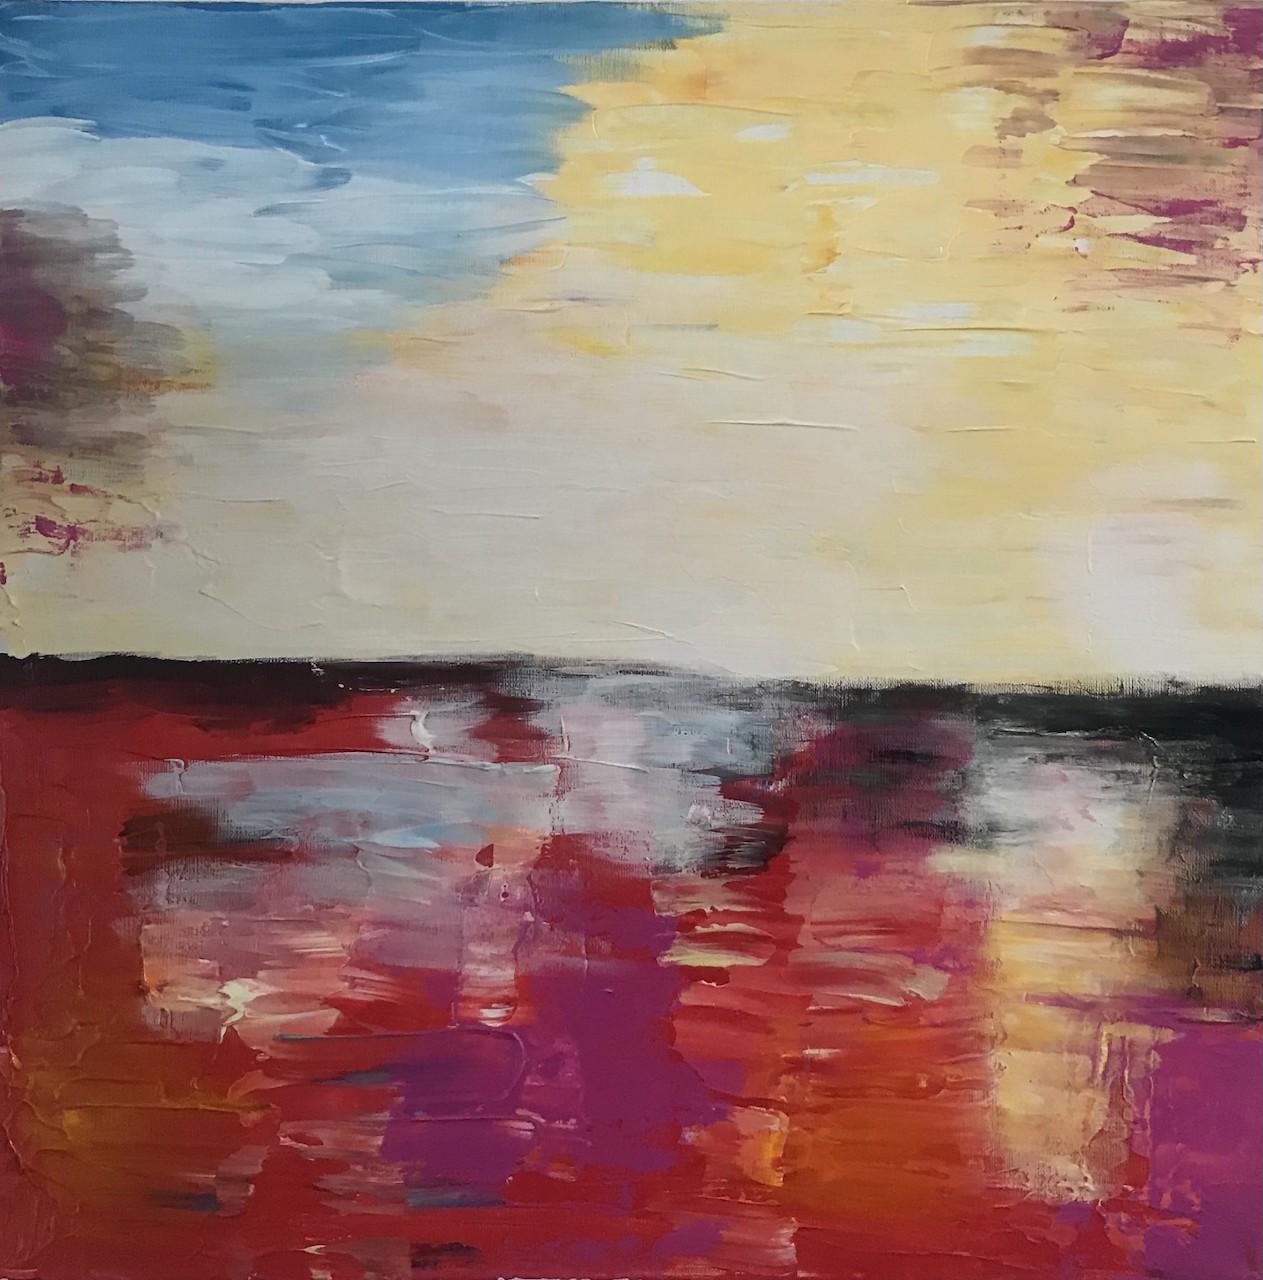 Platonic Reflections by Artist Fleur Park is an original painting. The scene depicts the beautiful glow and reflection of the setting sun.

Fleur Park, artist and painter, has abstract and minimalist artworks available at Wychwood Art in our gallery